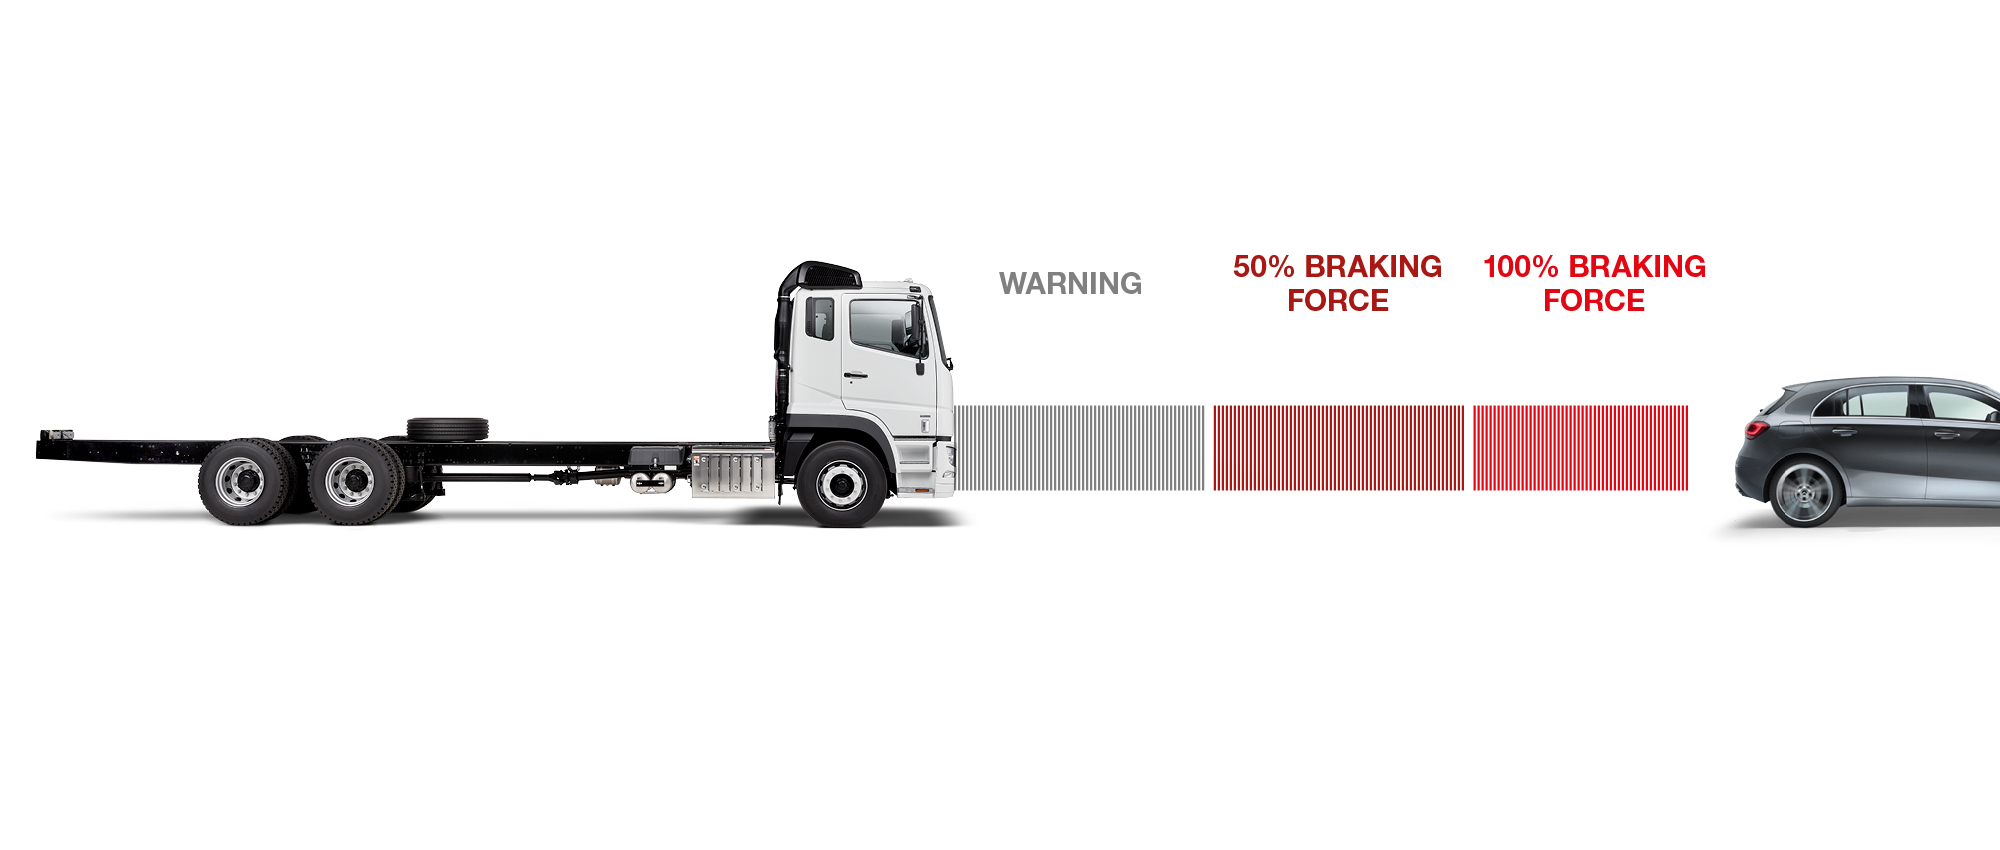 Active Break Assist 5 helps Daimler trucks stay safe via automatic breaking 